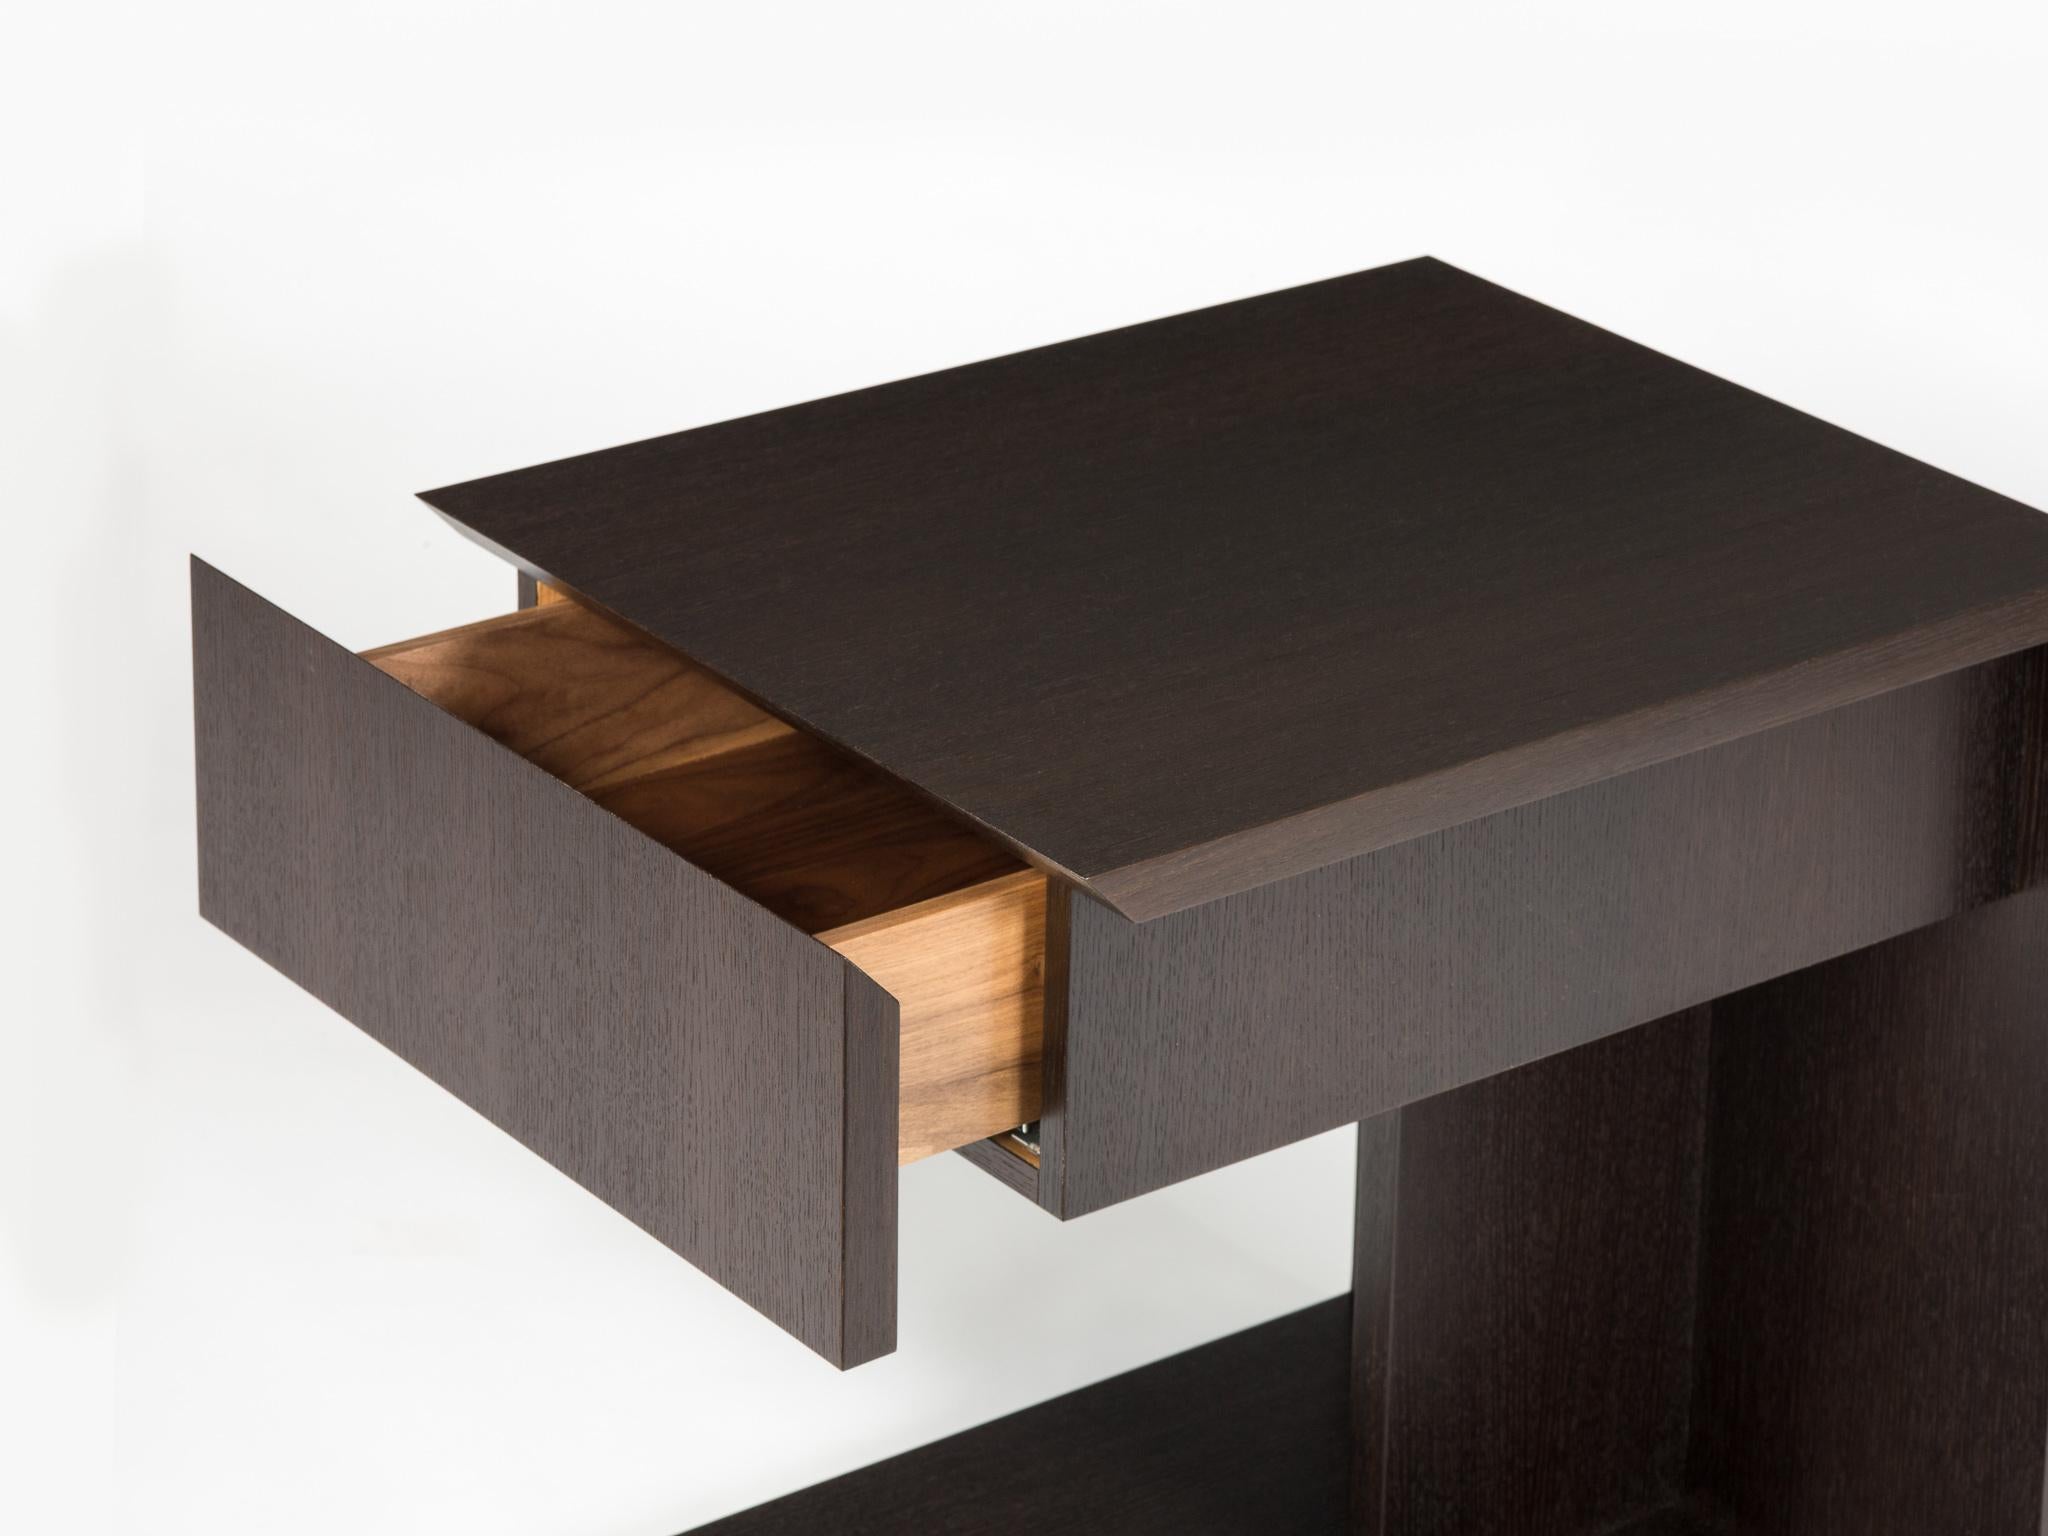 This version of our modern wood end table is called the 